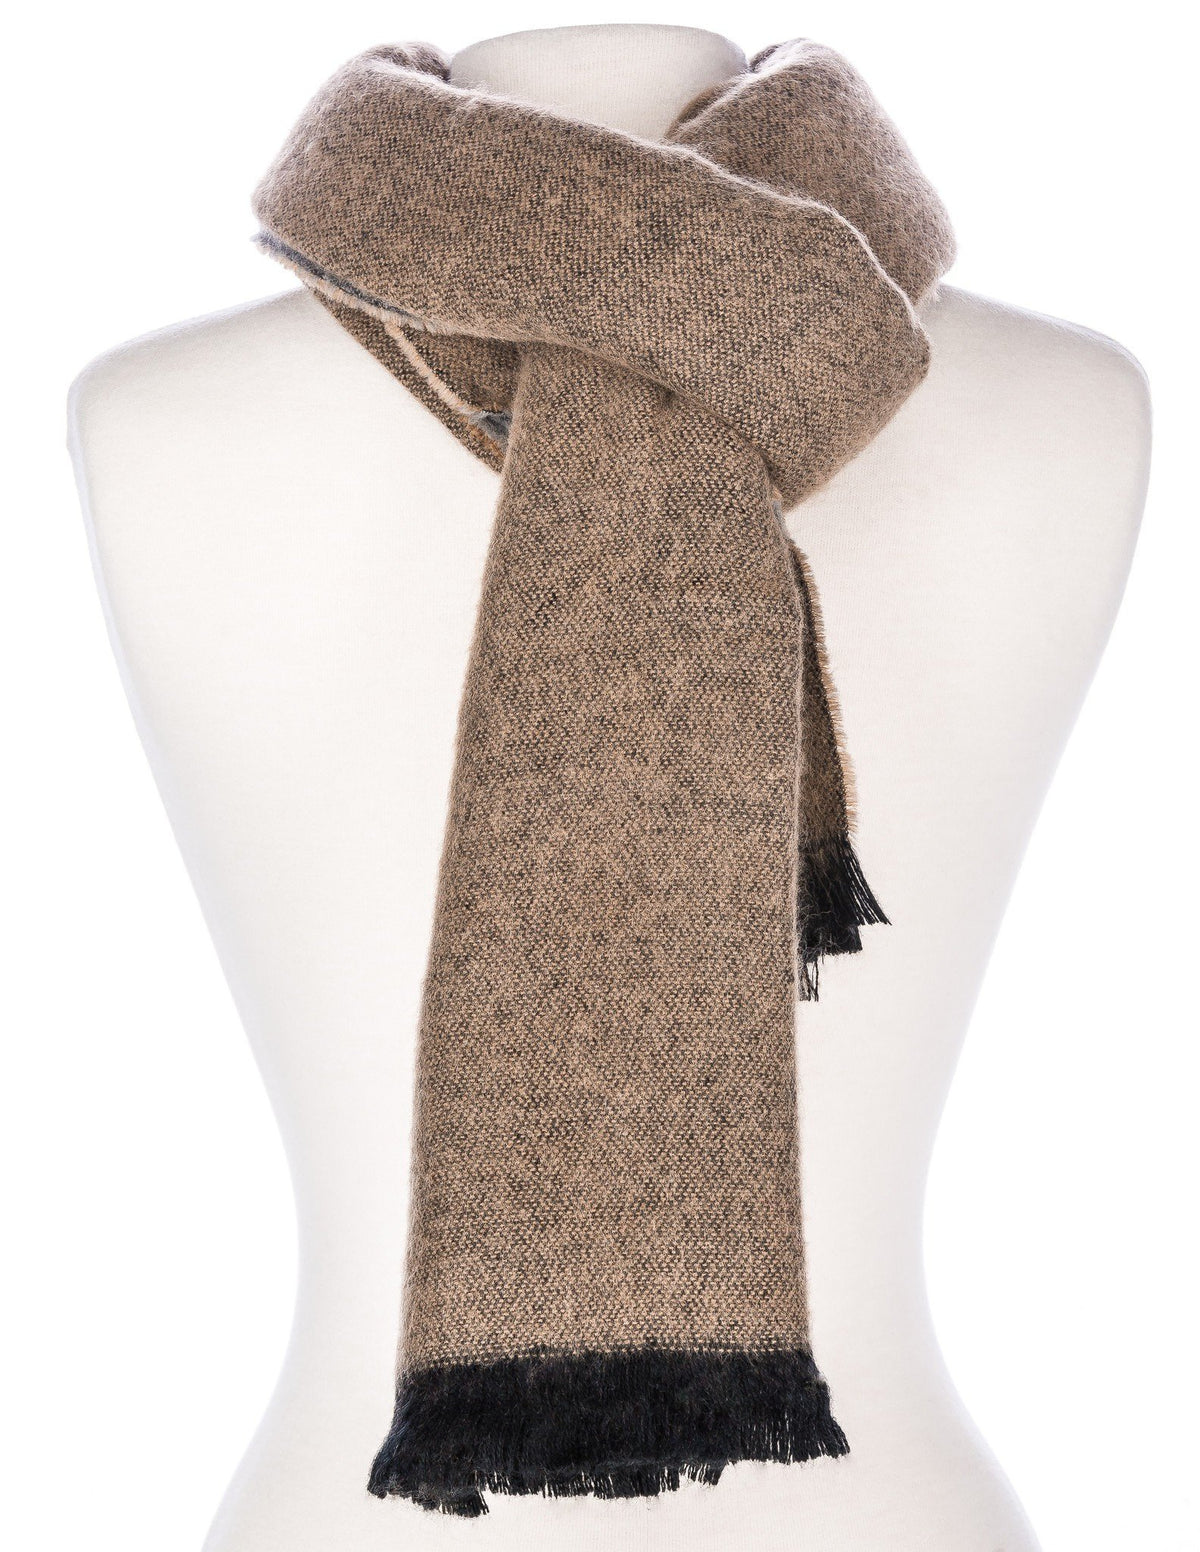 Men's Rochester Two-Tone Reversible Winter Scarf - Sand/Grey